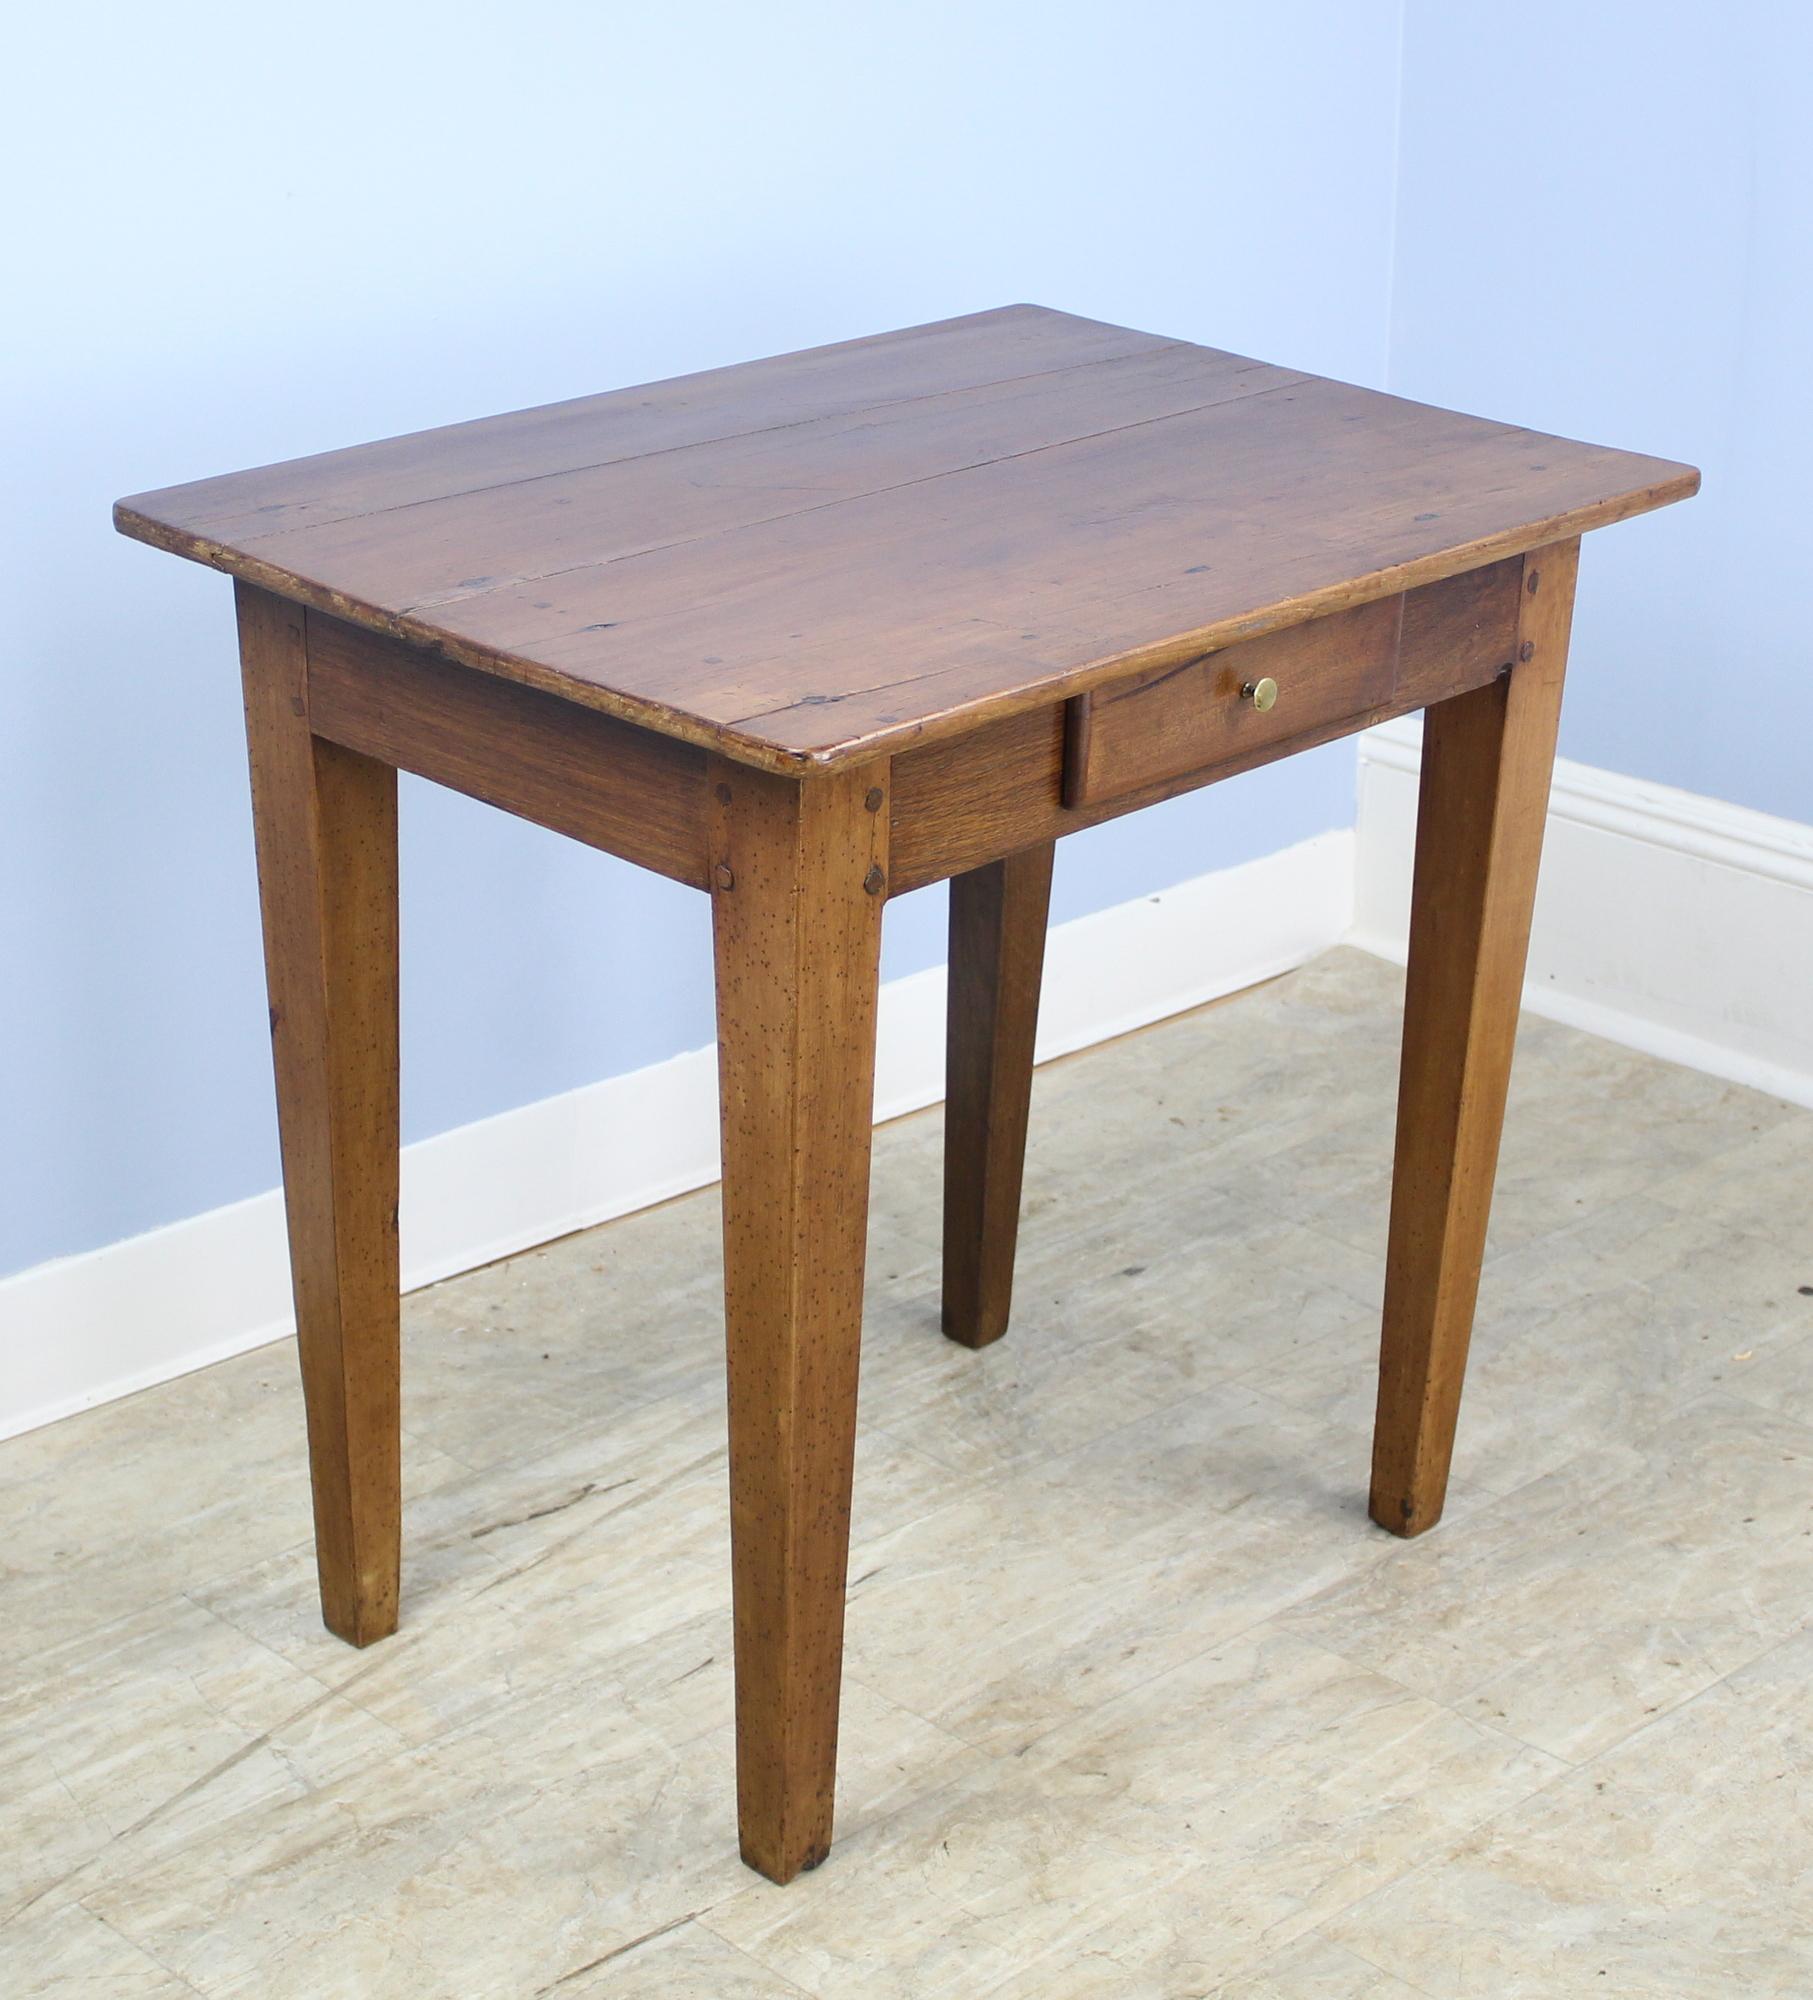 A graceful and sturdy antique French side table in mellow cherry. The piece features elegant tapered legs and a single drawer with hand-wrought cherry knob. Lovely patina and grain.